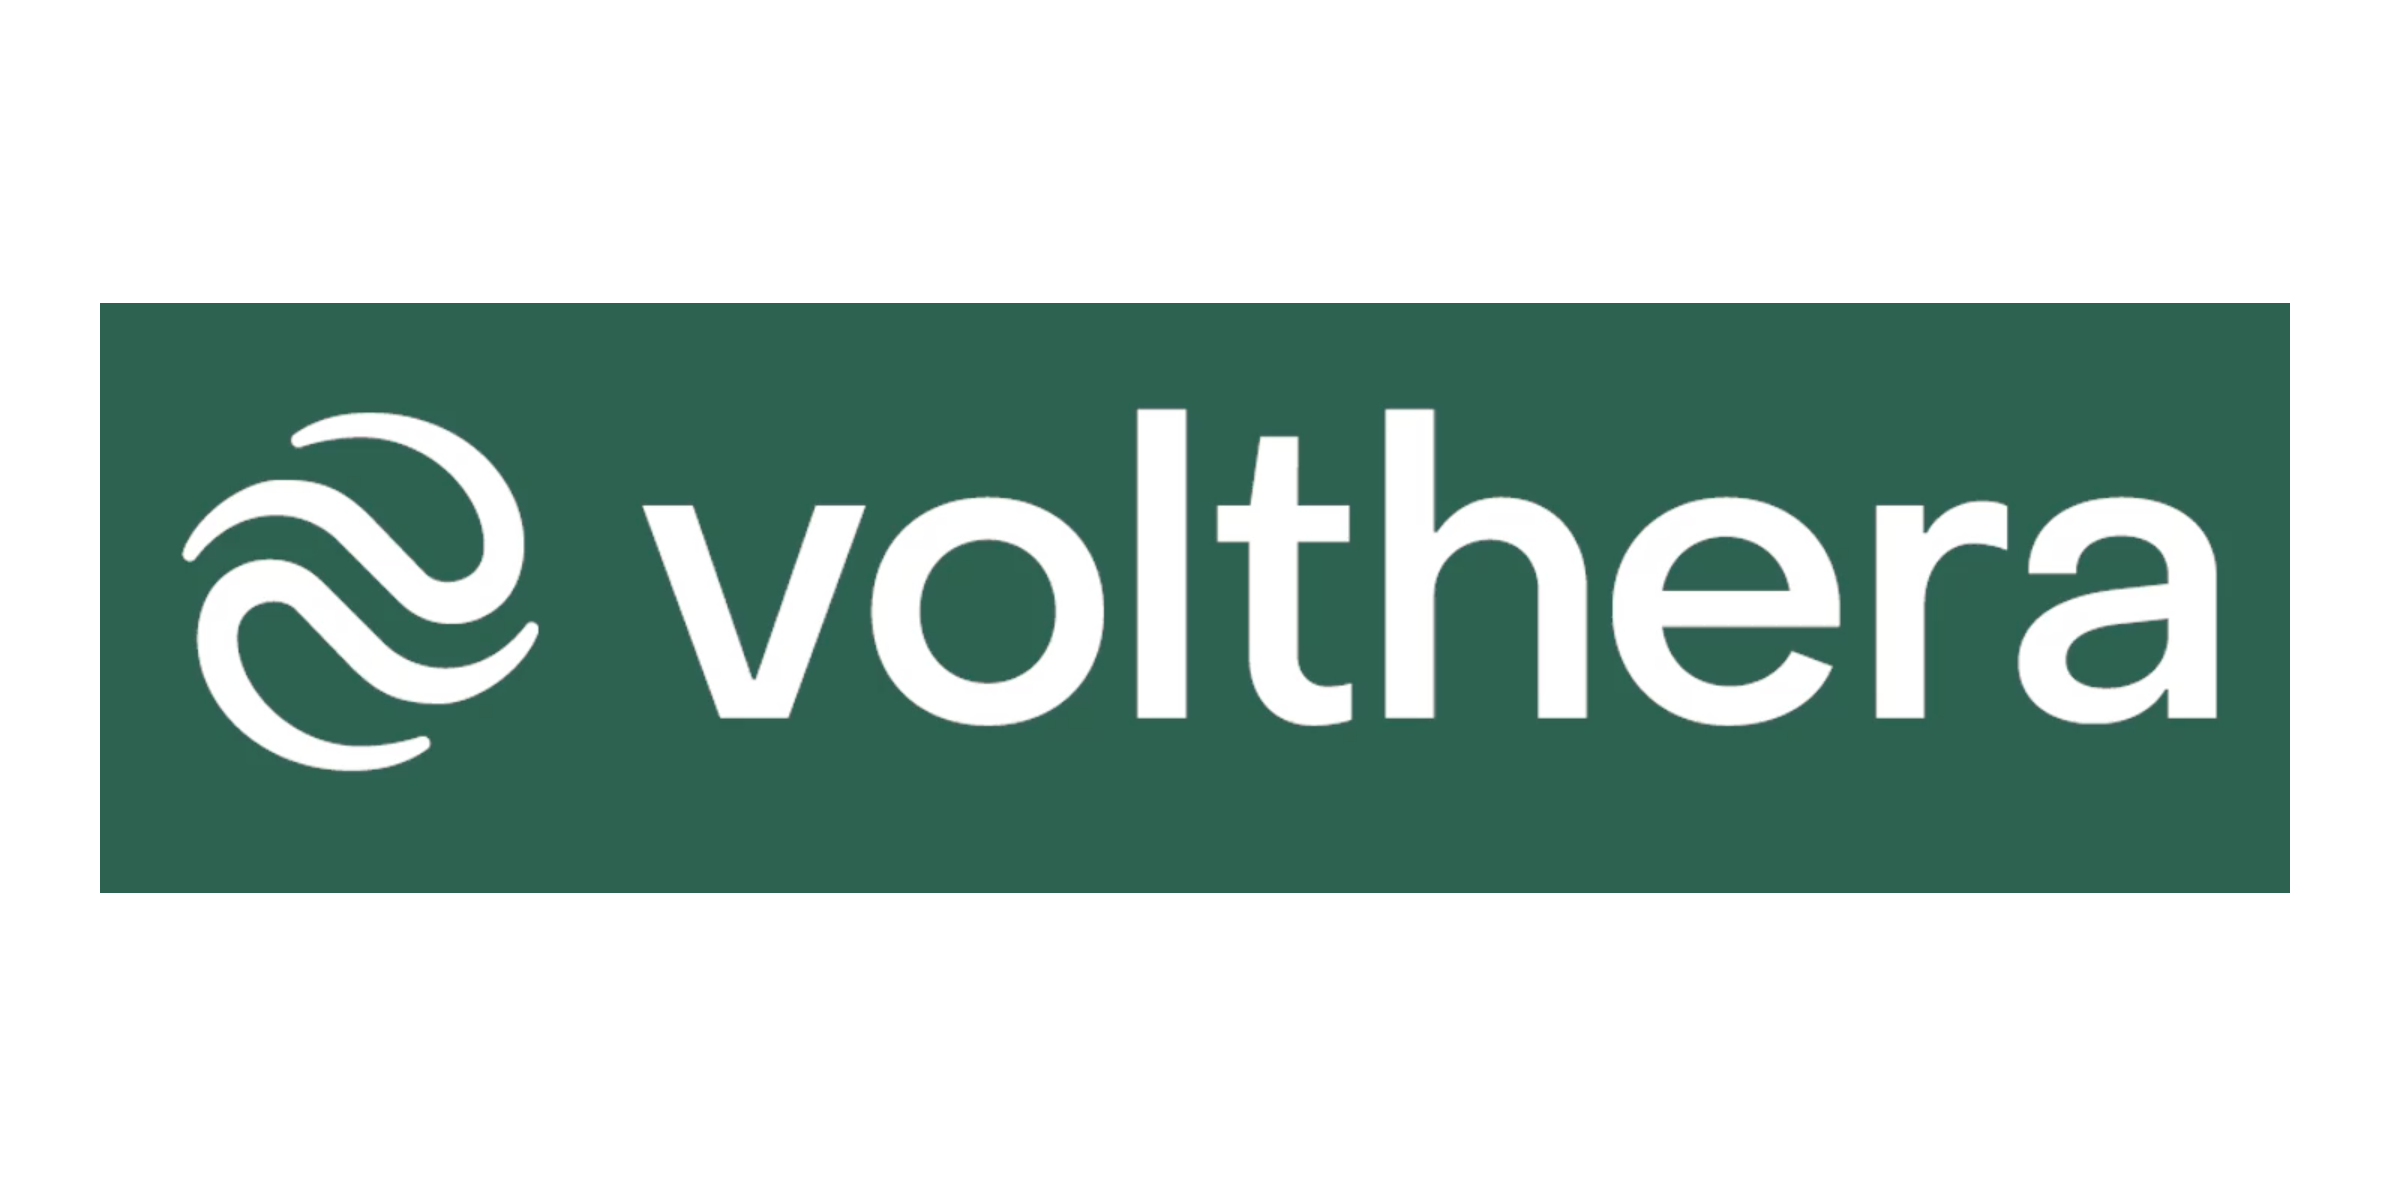 Volthera